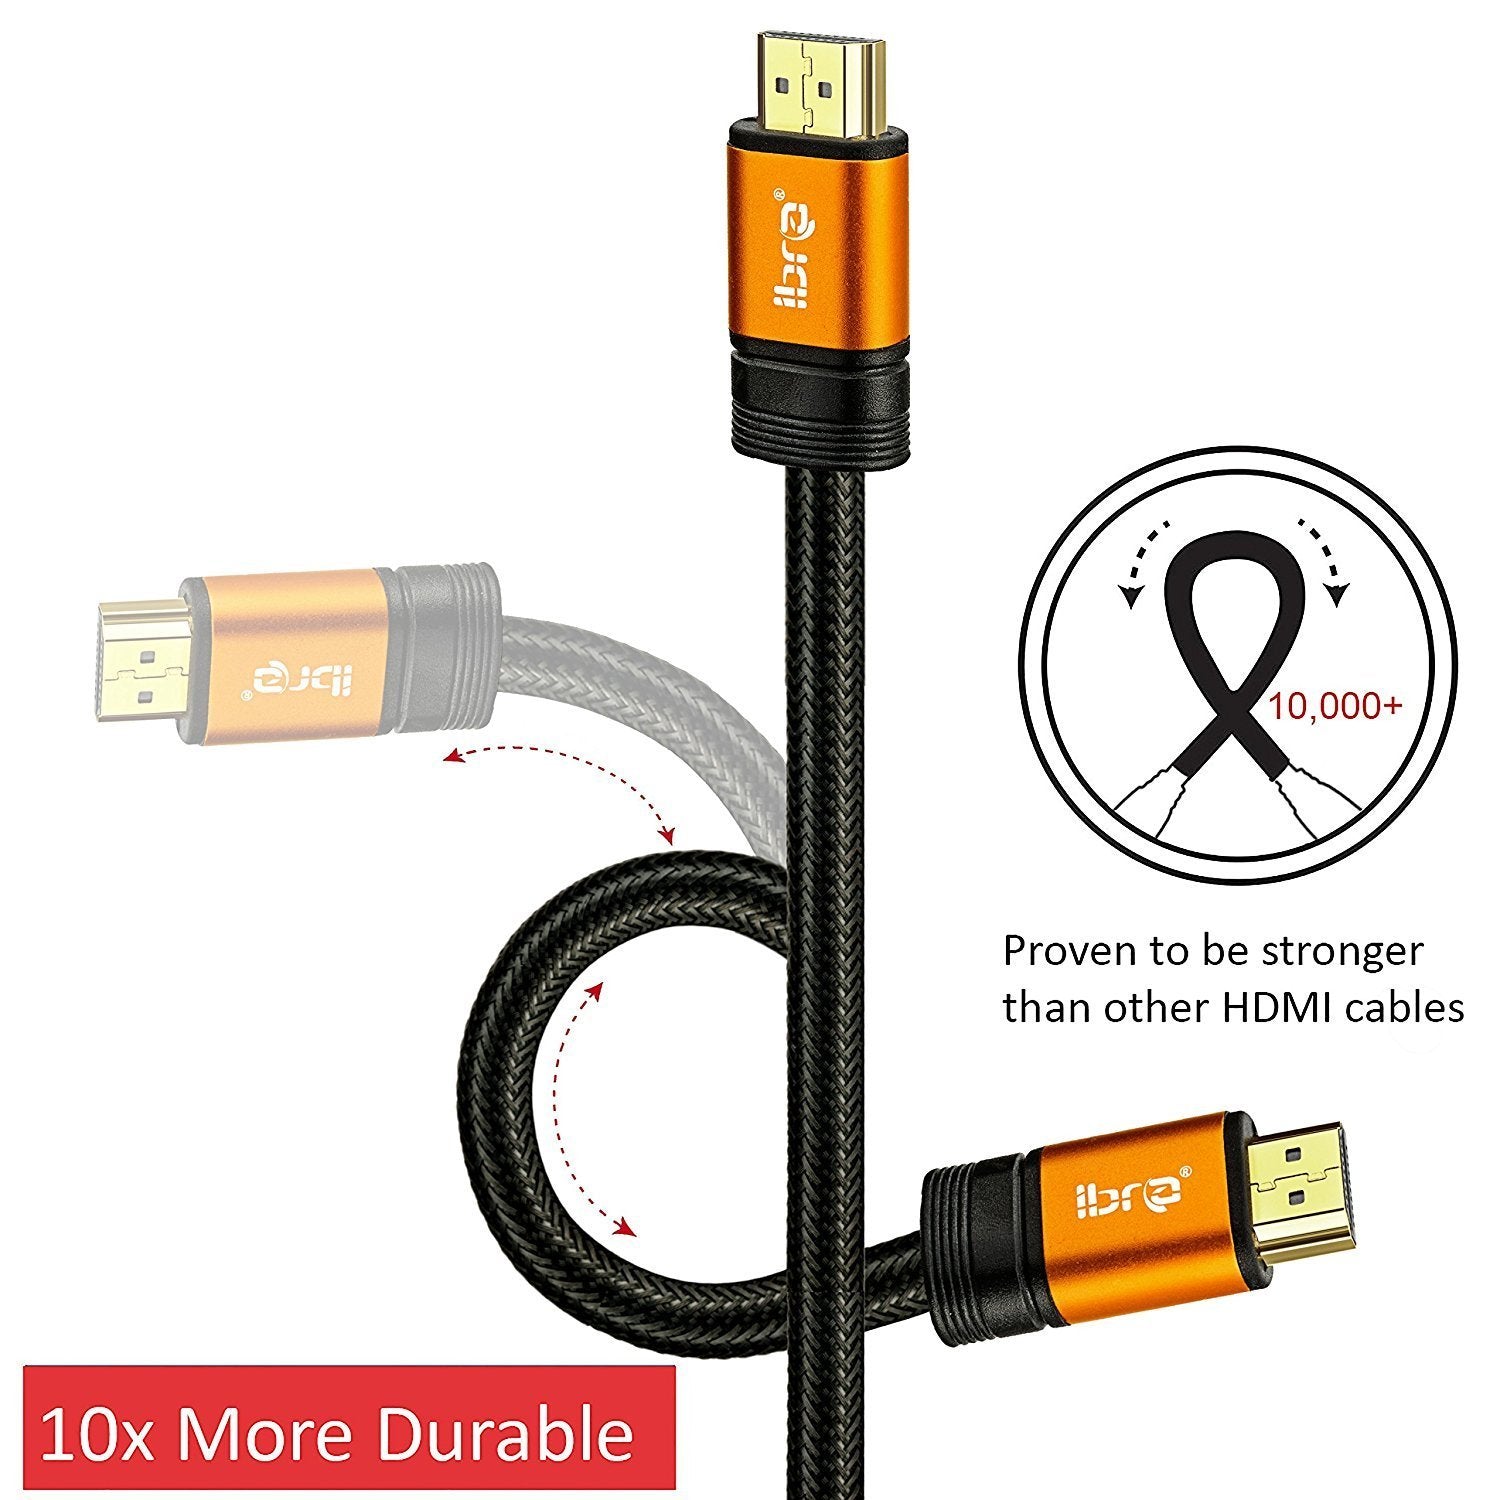 IBRA Orange HDMI Cable 20M - UHD HDMI 2.0 (4K@60Hz) Ready -18Gbps-28AWG Braided Cord -Gold Plated Connectors -Ethernet,Audio Return-Video 4K 2160p,HD 1080p,3D -Xbox PlayStation PS3 PS4 PC Apple TV